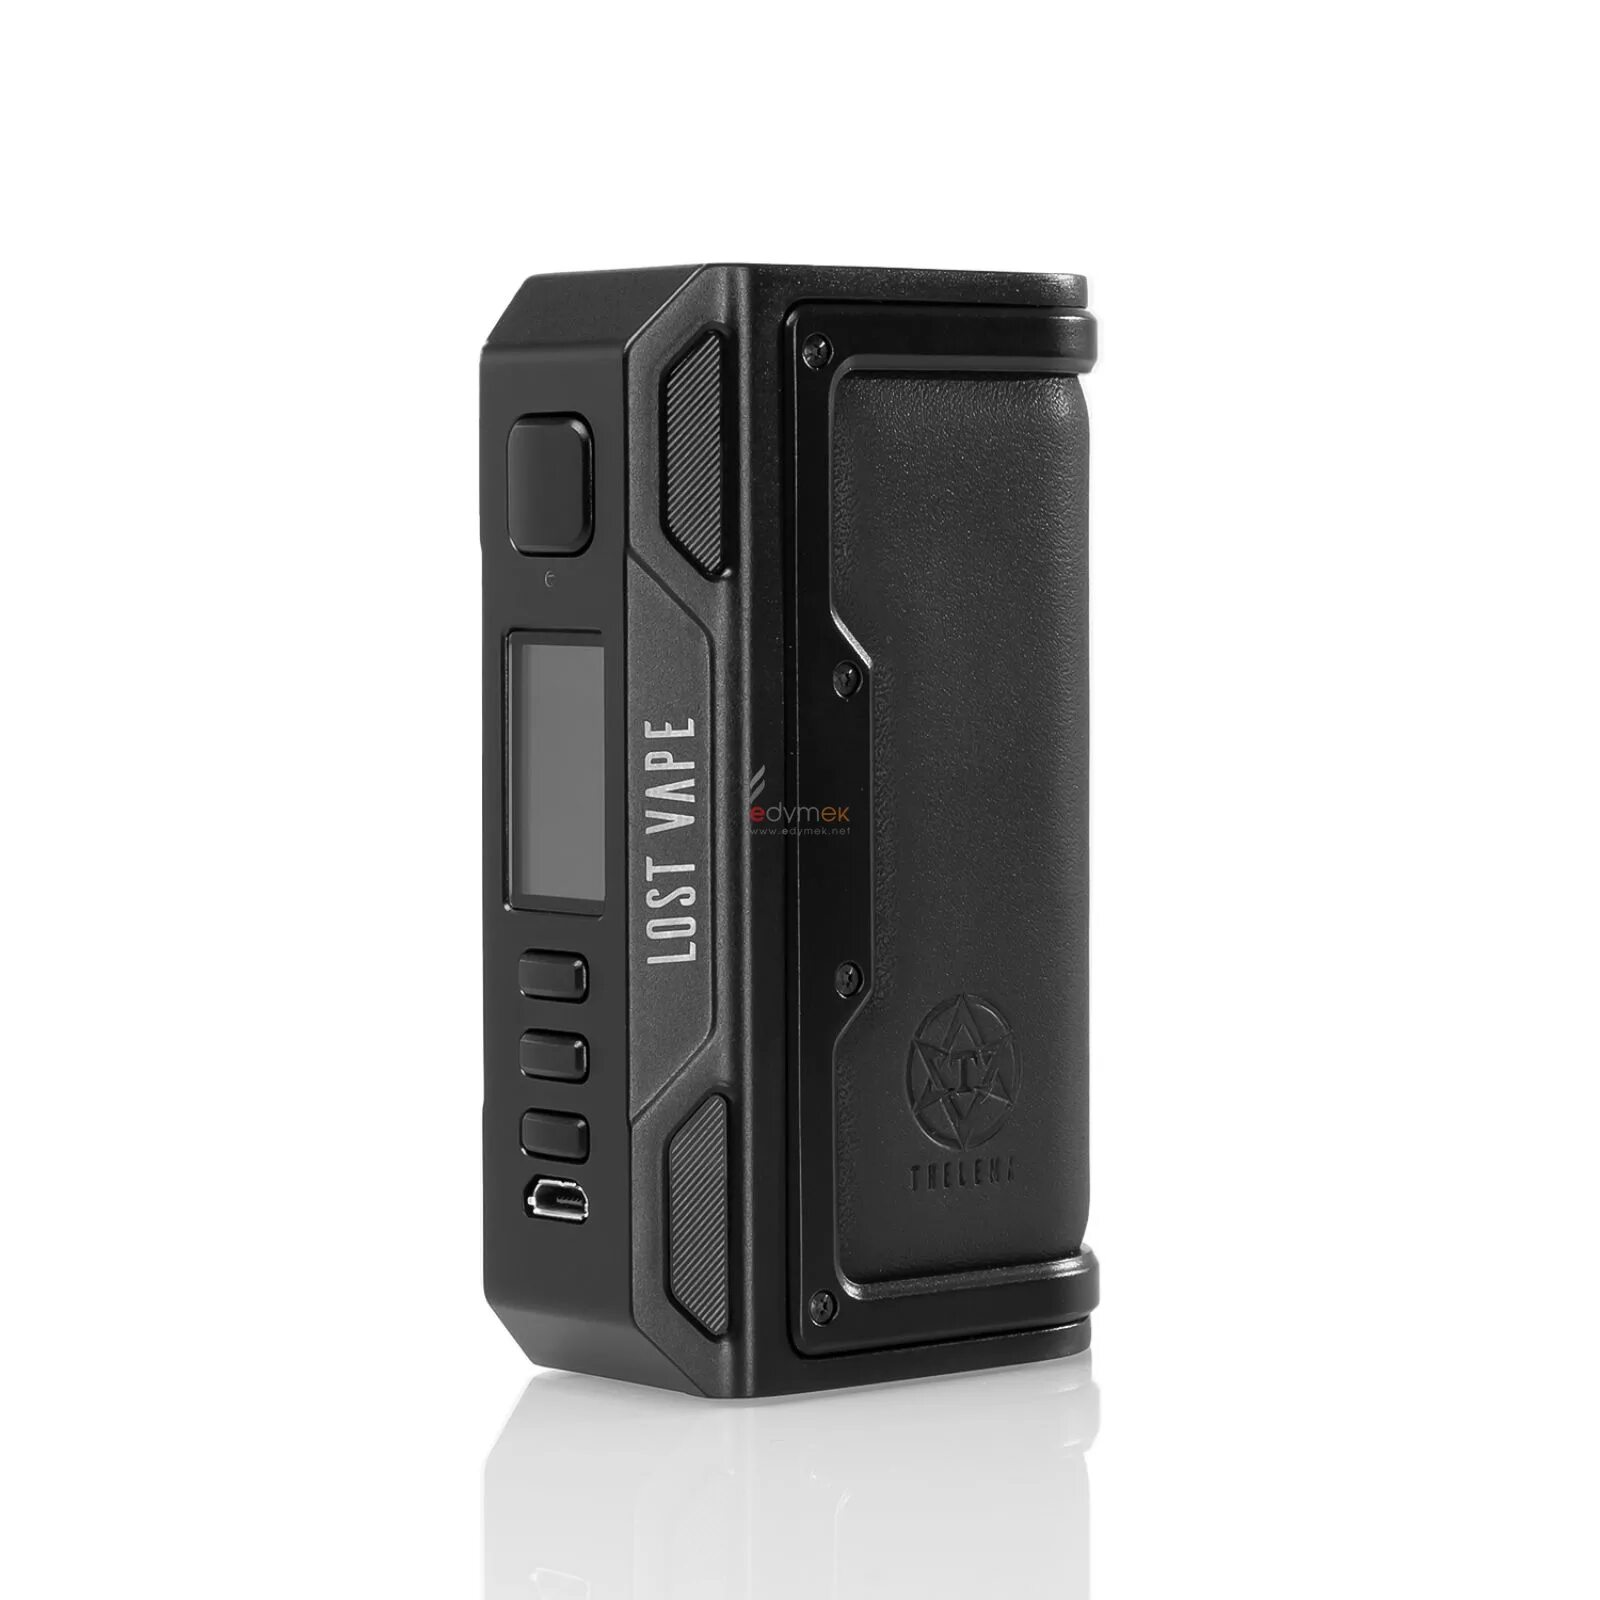 Lost vape thelema 40. Lost Vape Thelema dna250c. Lost Vape Thelema dna250c набор. Lost Vape Thelema dna250c Box Mod. Бокс мод Lost Vape Thelema Quest 200w.